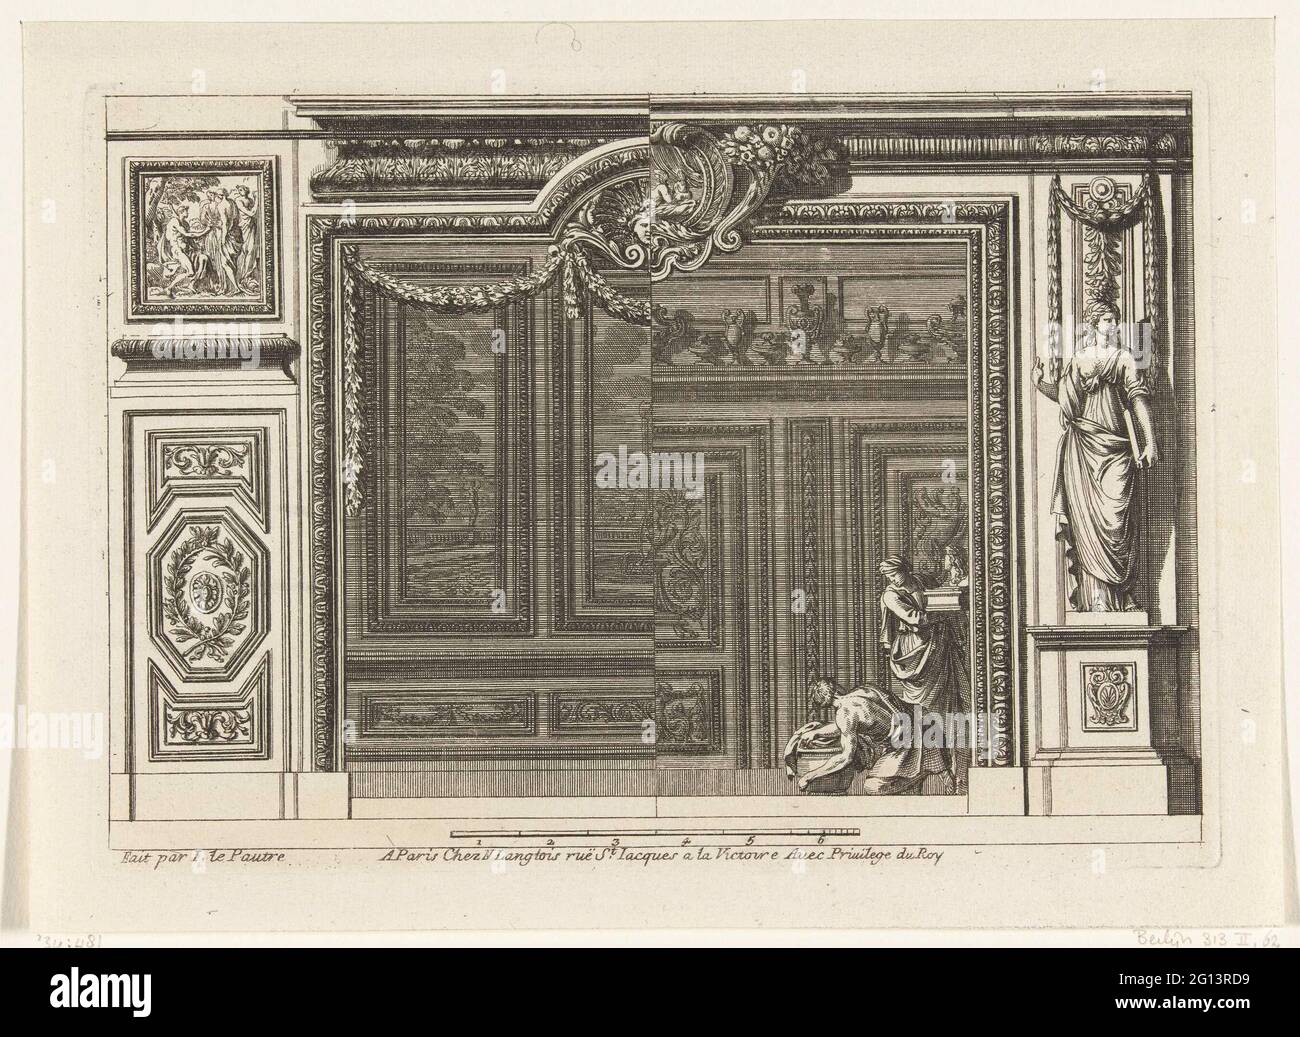 Alcove with variant for right half; Alcofen à la Francoise. Alcove with a  door with DESSUS DE-PORTE with figures. The right side is a variant with a  picture of a woman on